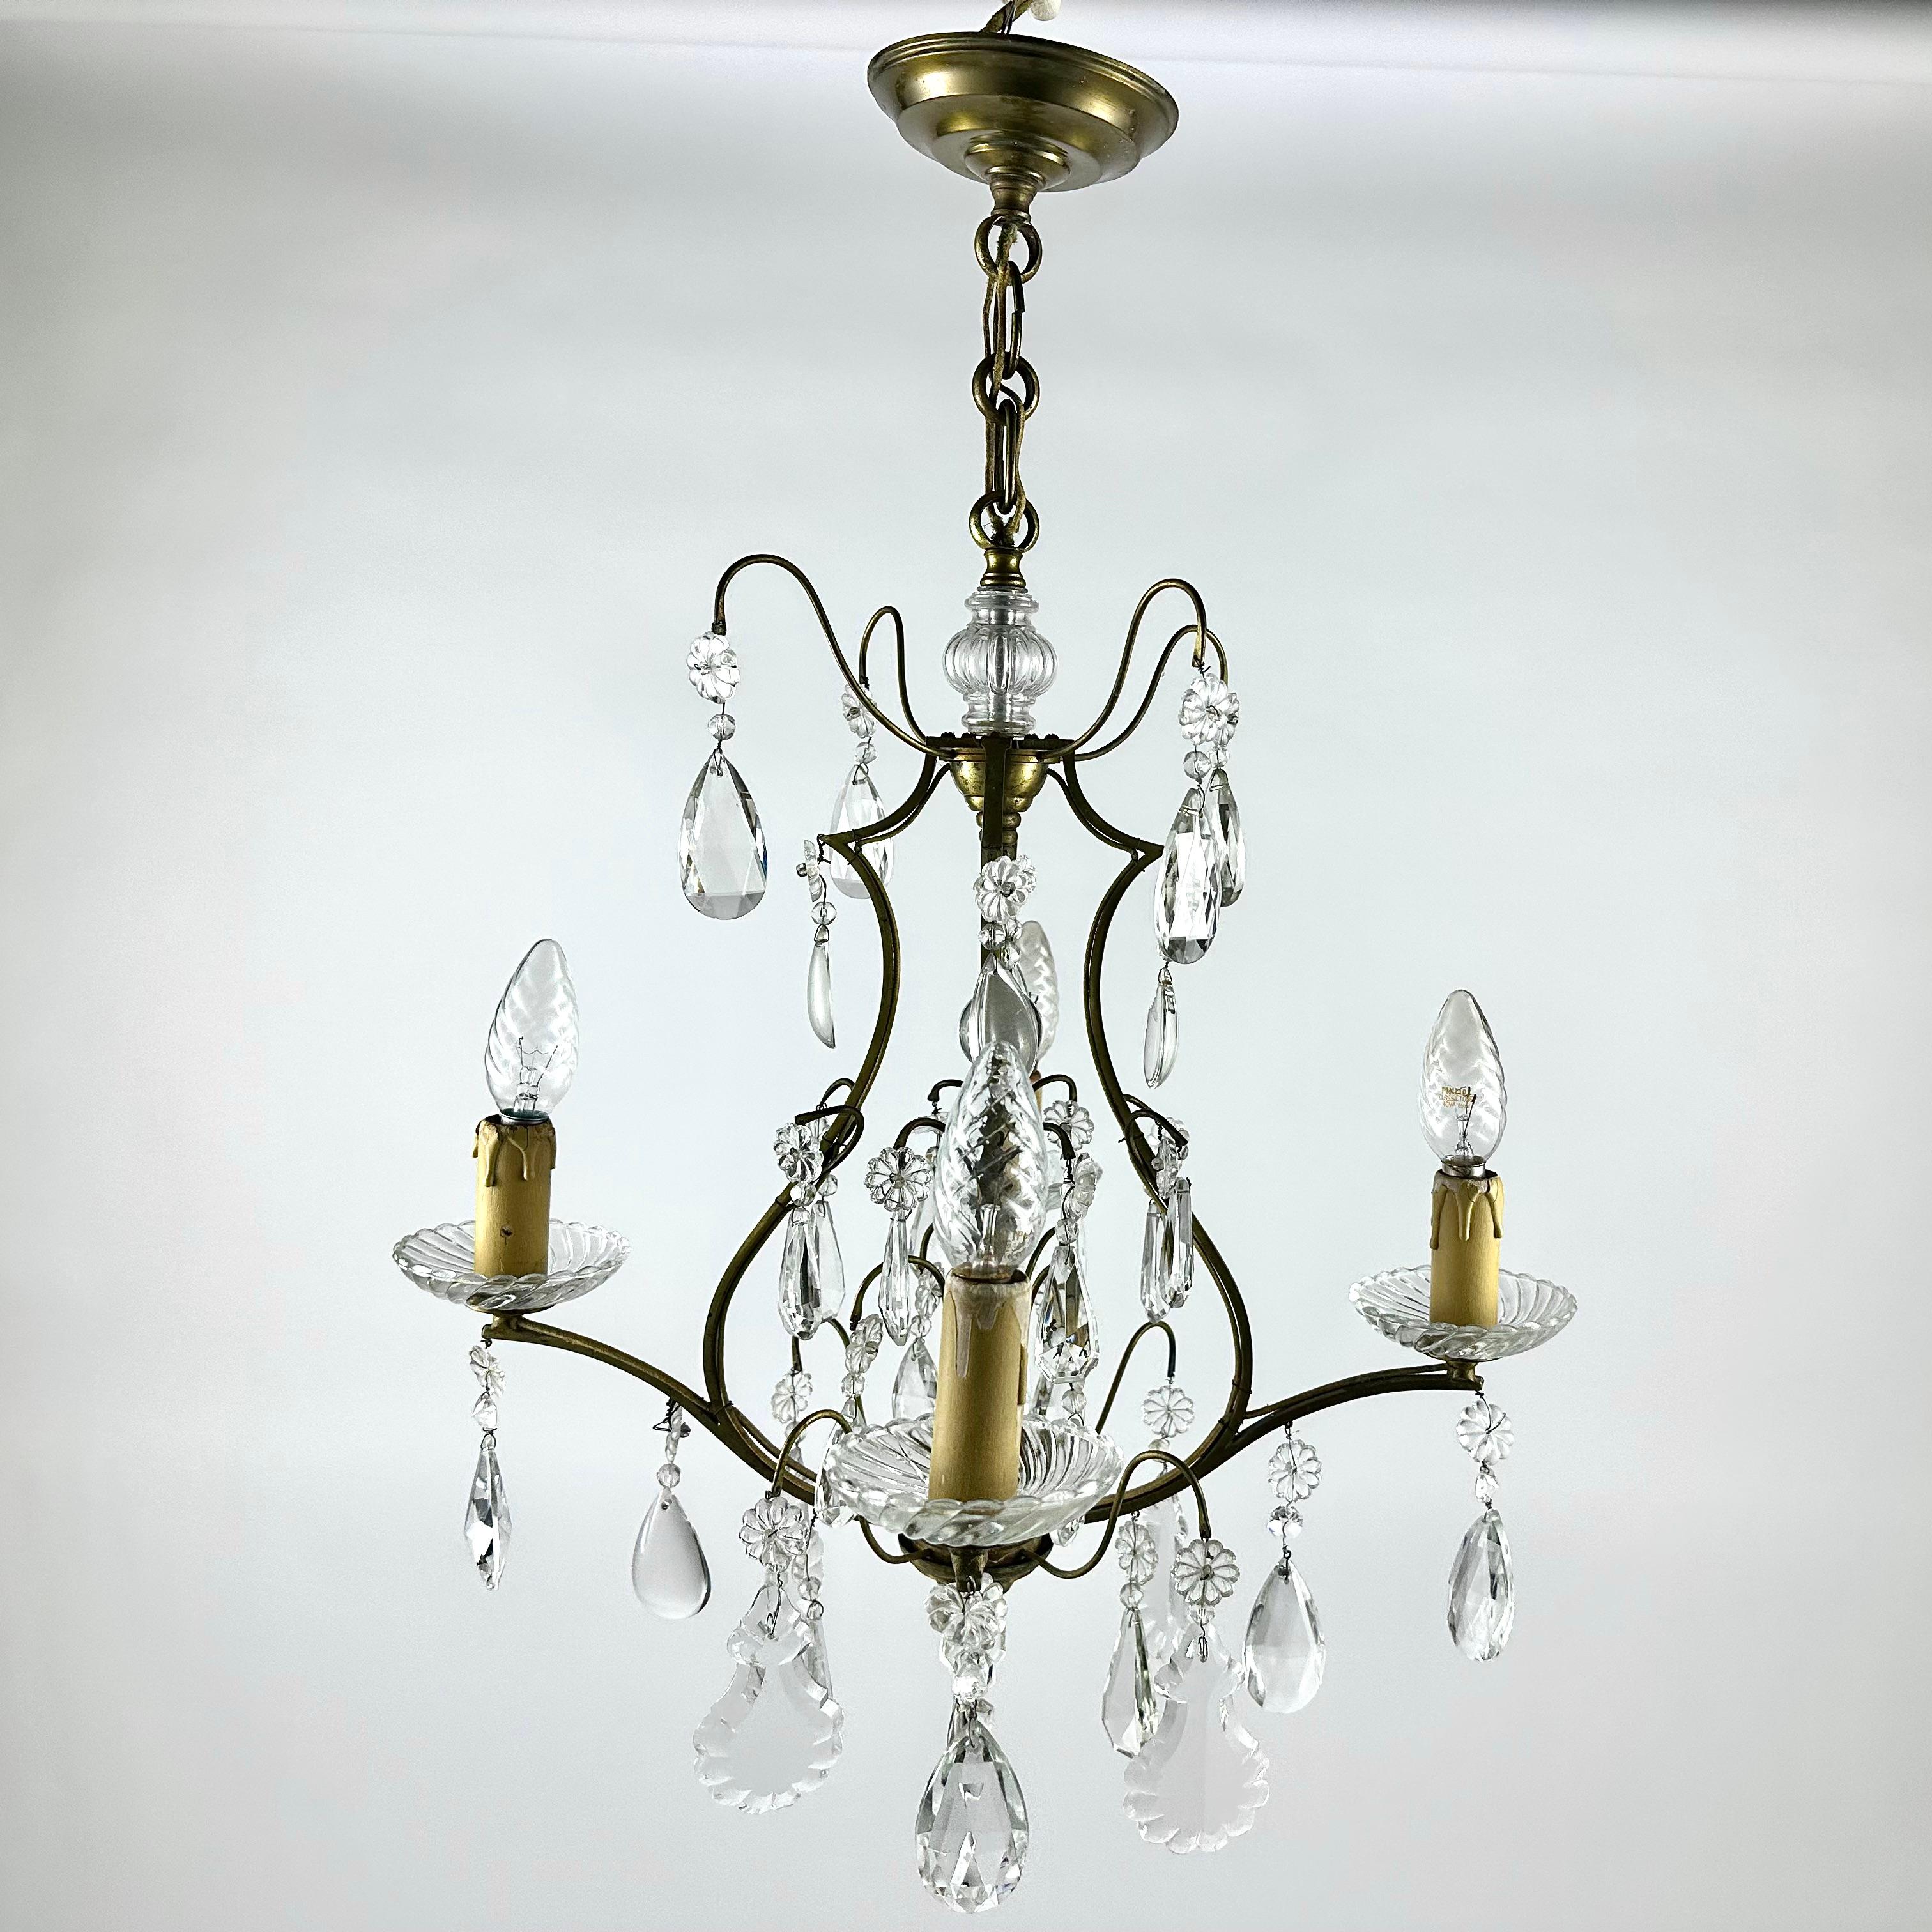 Bronzed Chandelier Antique French Lighting Baroque style Early 20th Century For Sale